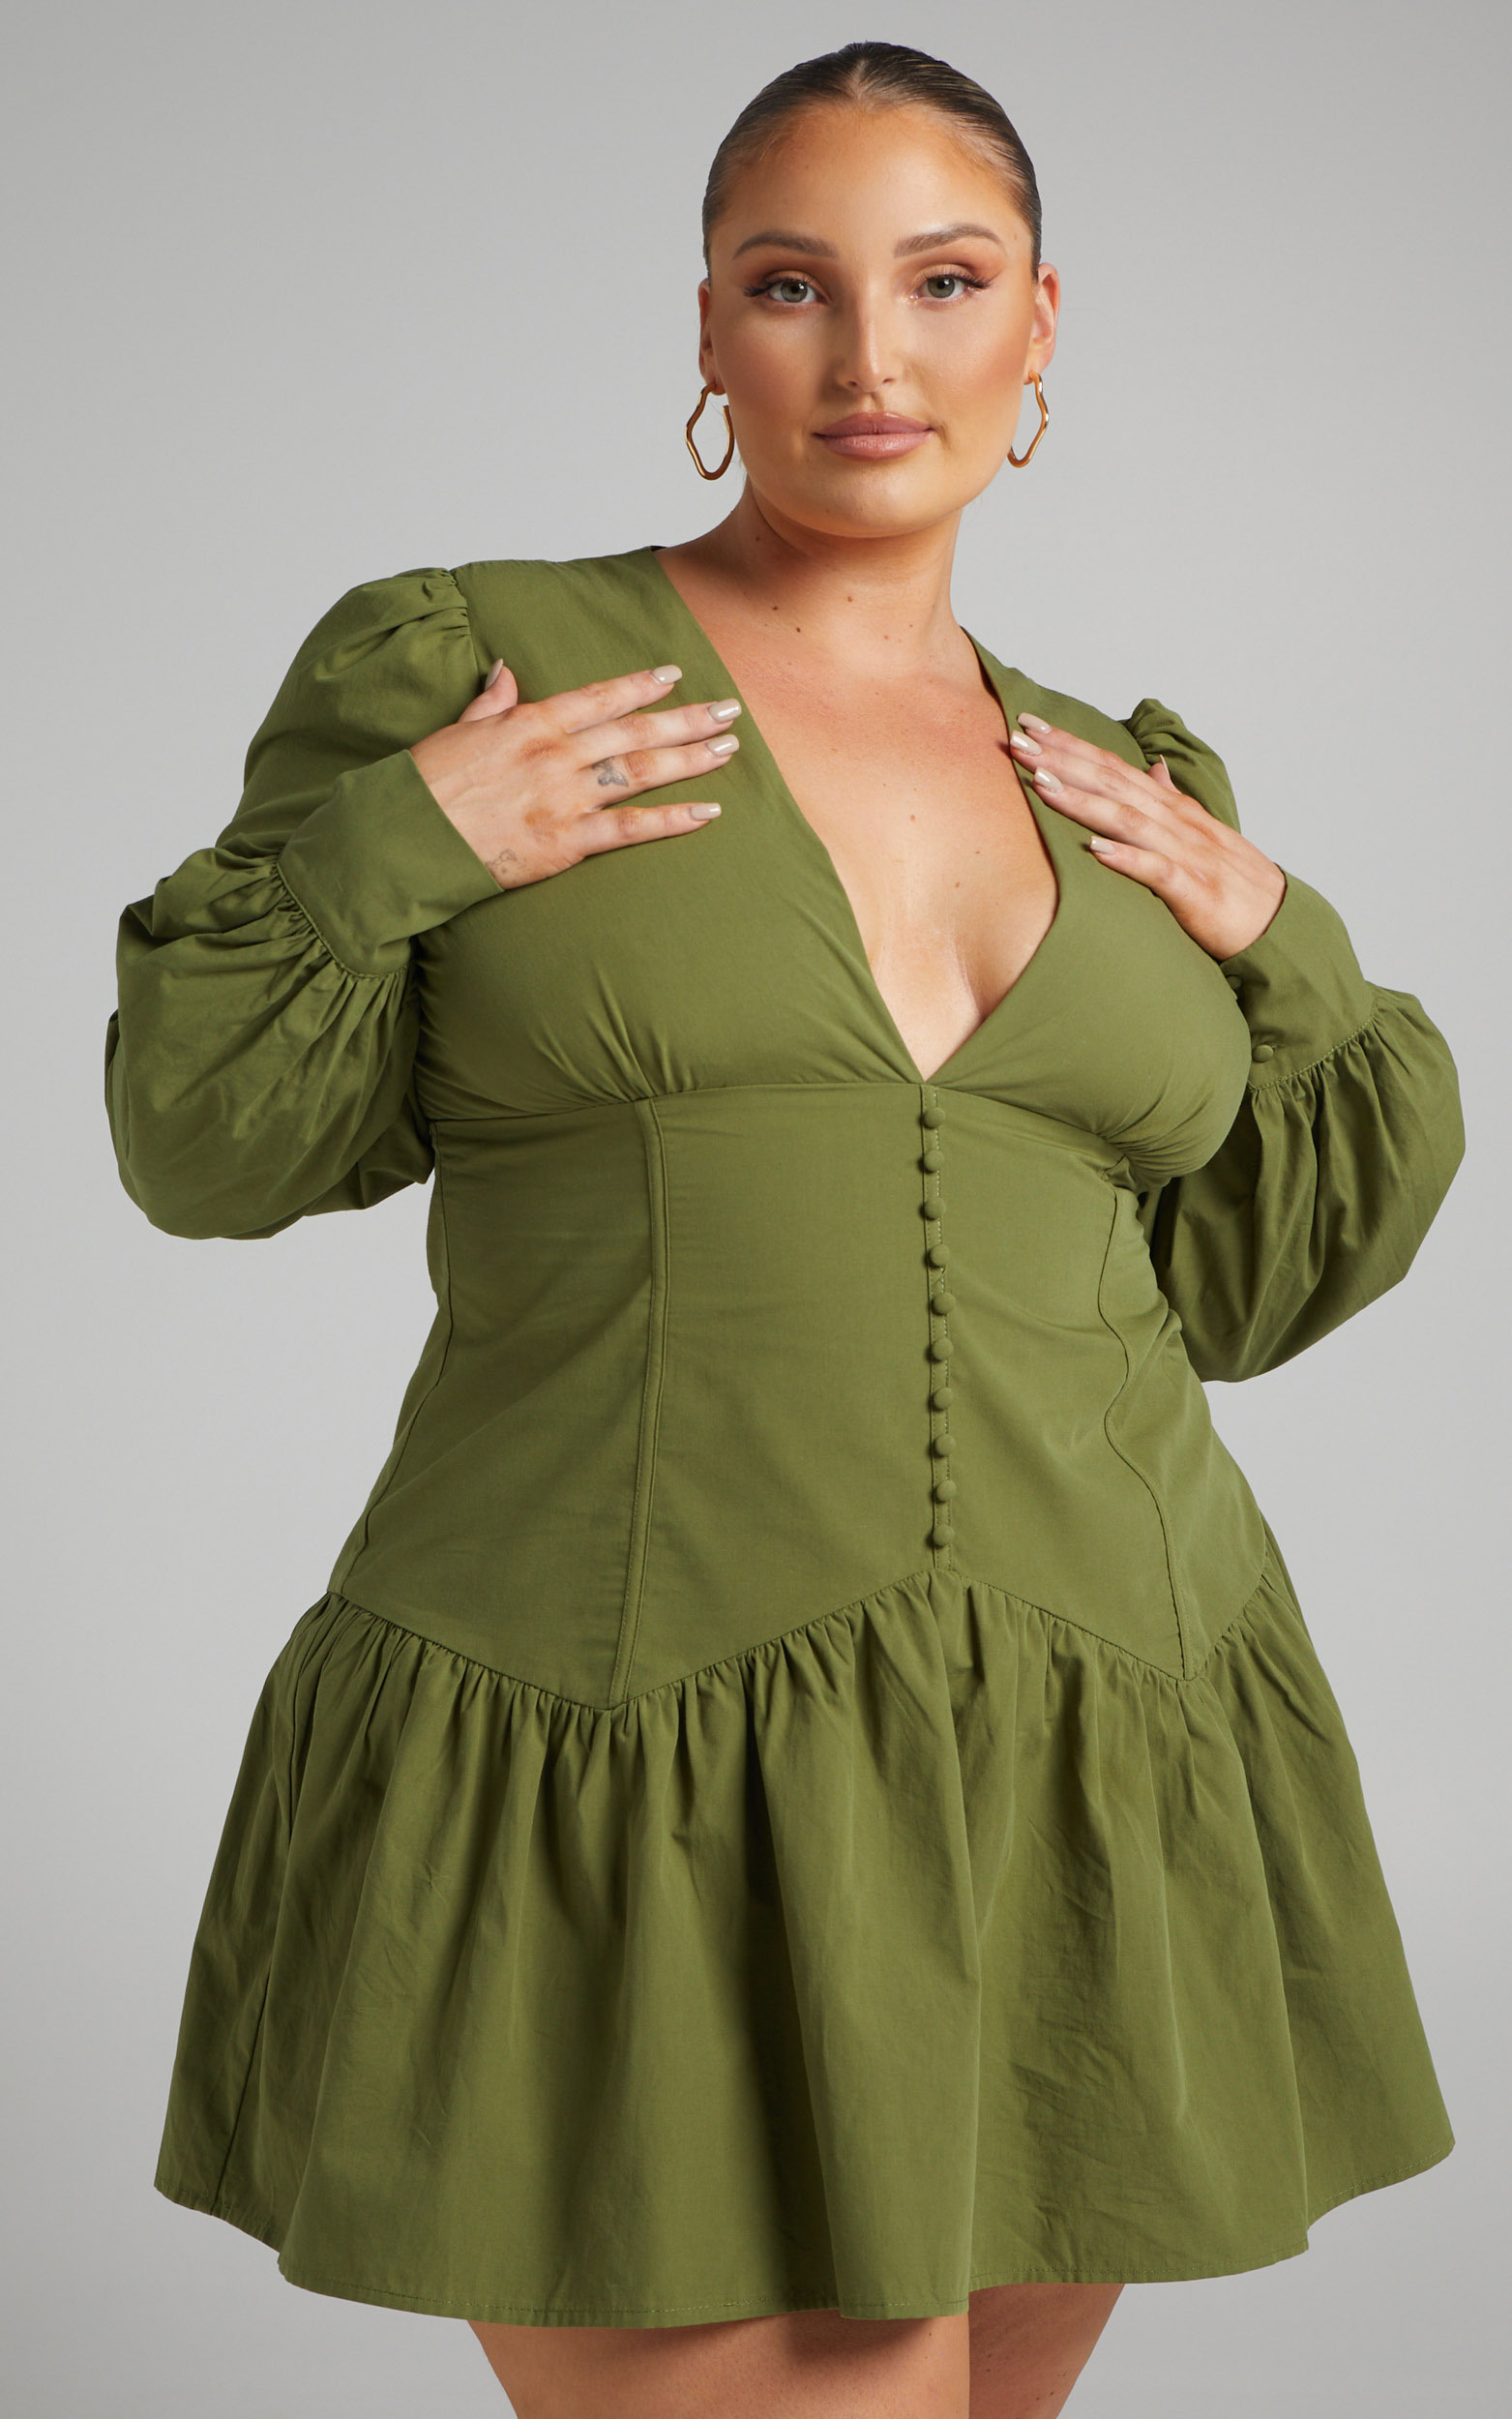 Carlyle Long Sleeve Mini Dress with Corset Detailing in Khaki - 04, GRN3, hi-res image number null